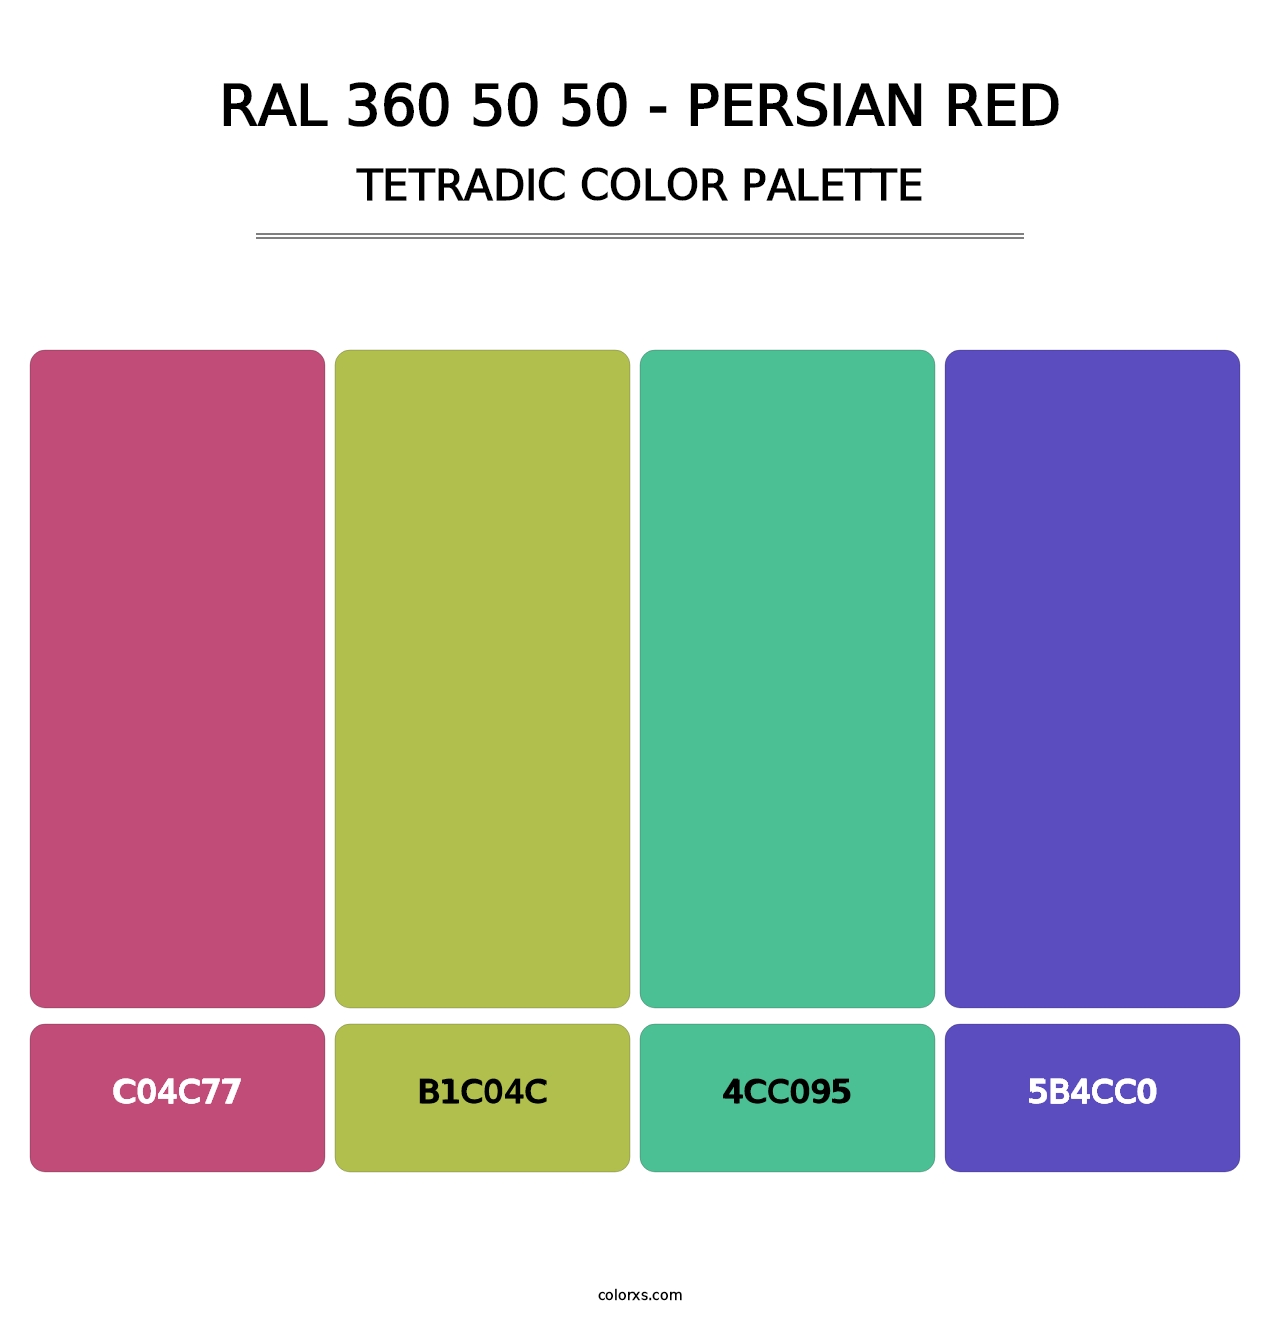 RAL 360 50 50 - Persian Red - Tetradic Color Palette